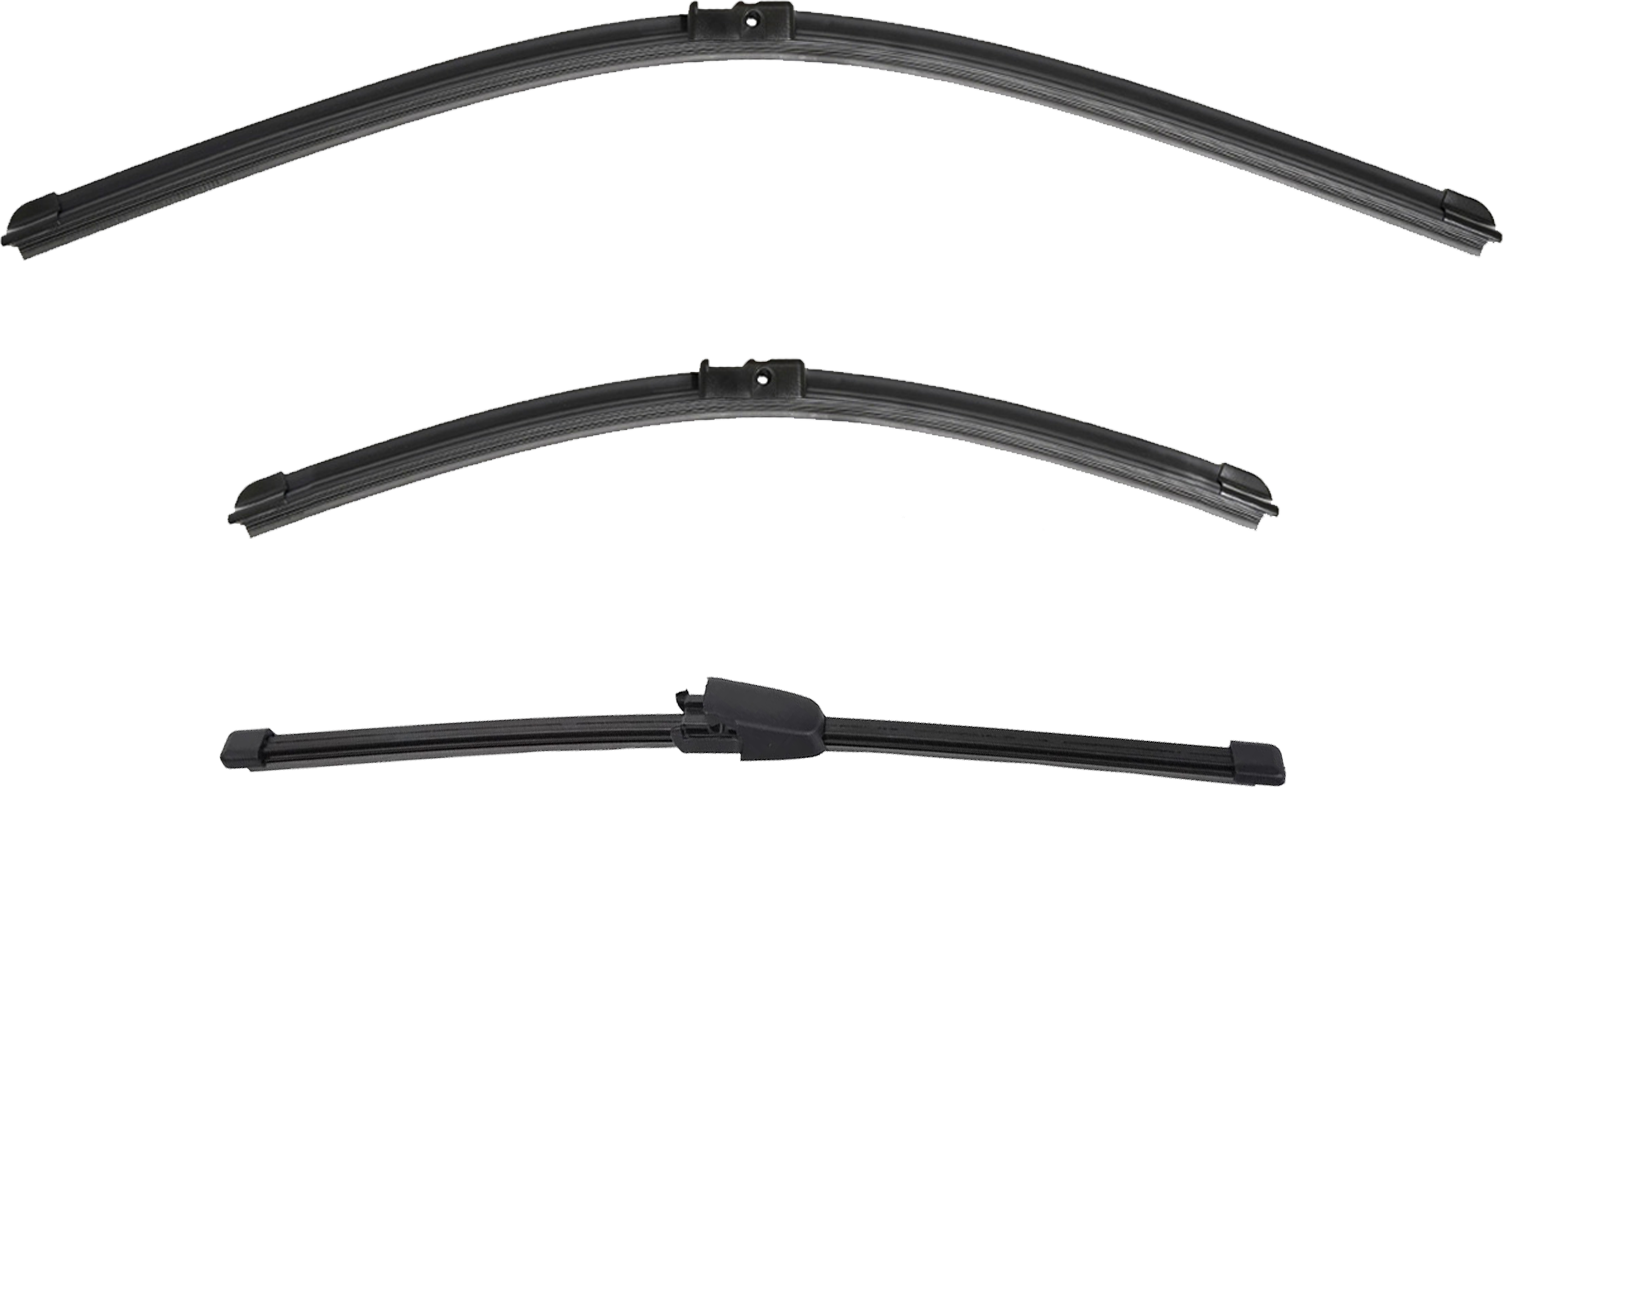 Volkswagen Caddy 2005-2006 (2K 2KN) Rear Tailgate Replacement Wiper Blades